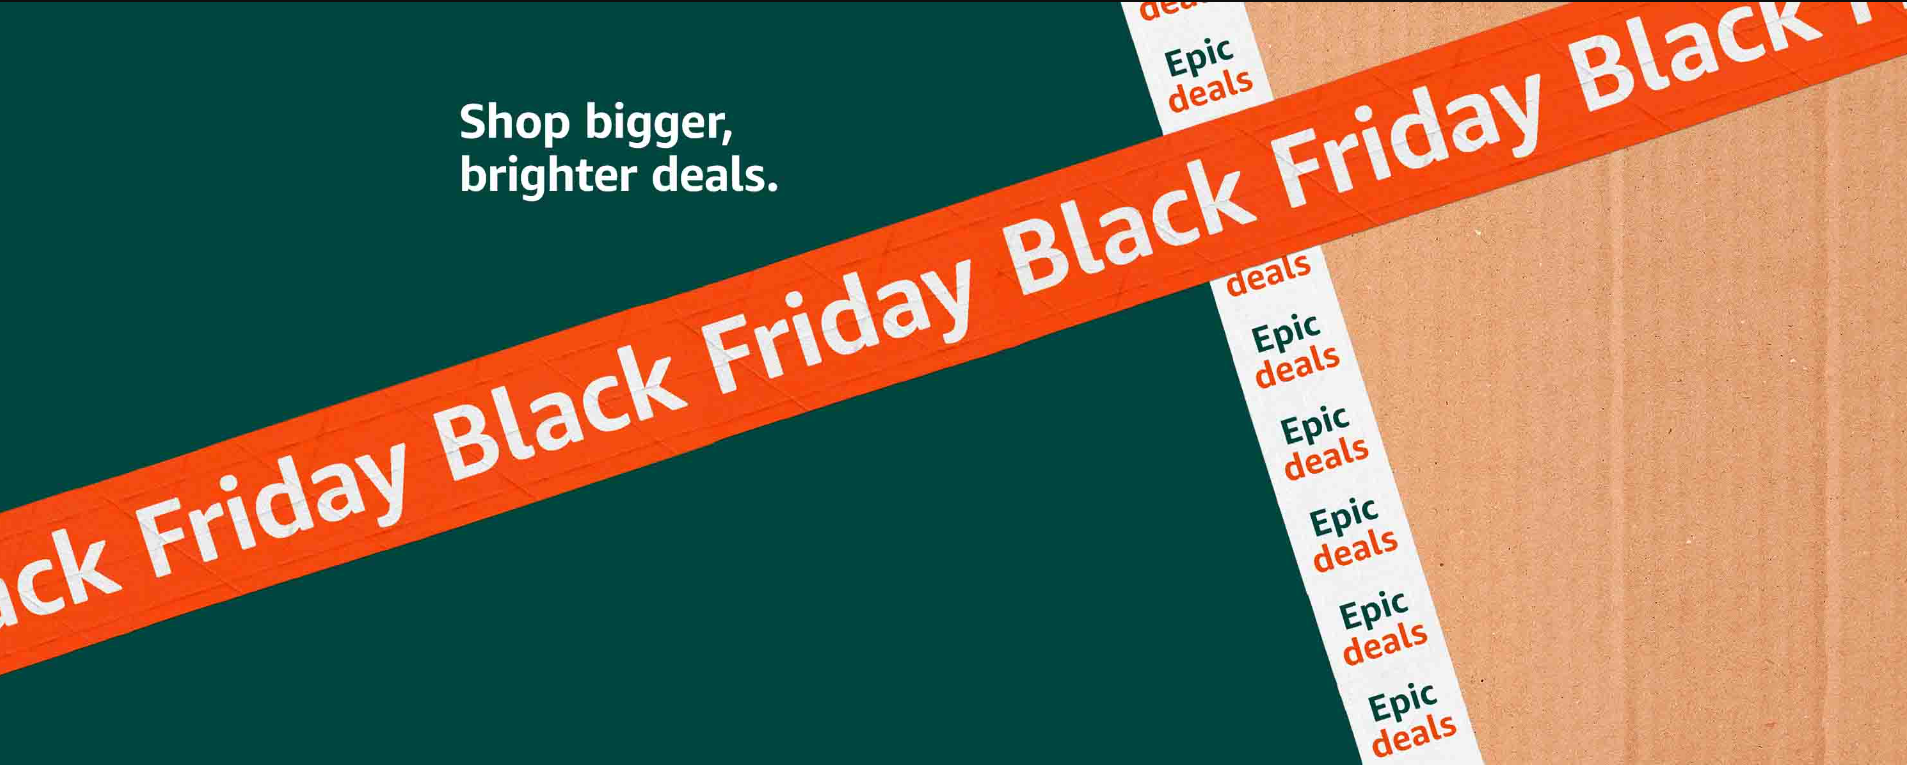 Amazon Plant Based/Vegan Black Friday deals - Up to 70% OFF foods, books, vitamins & supplements